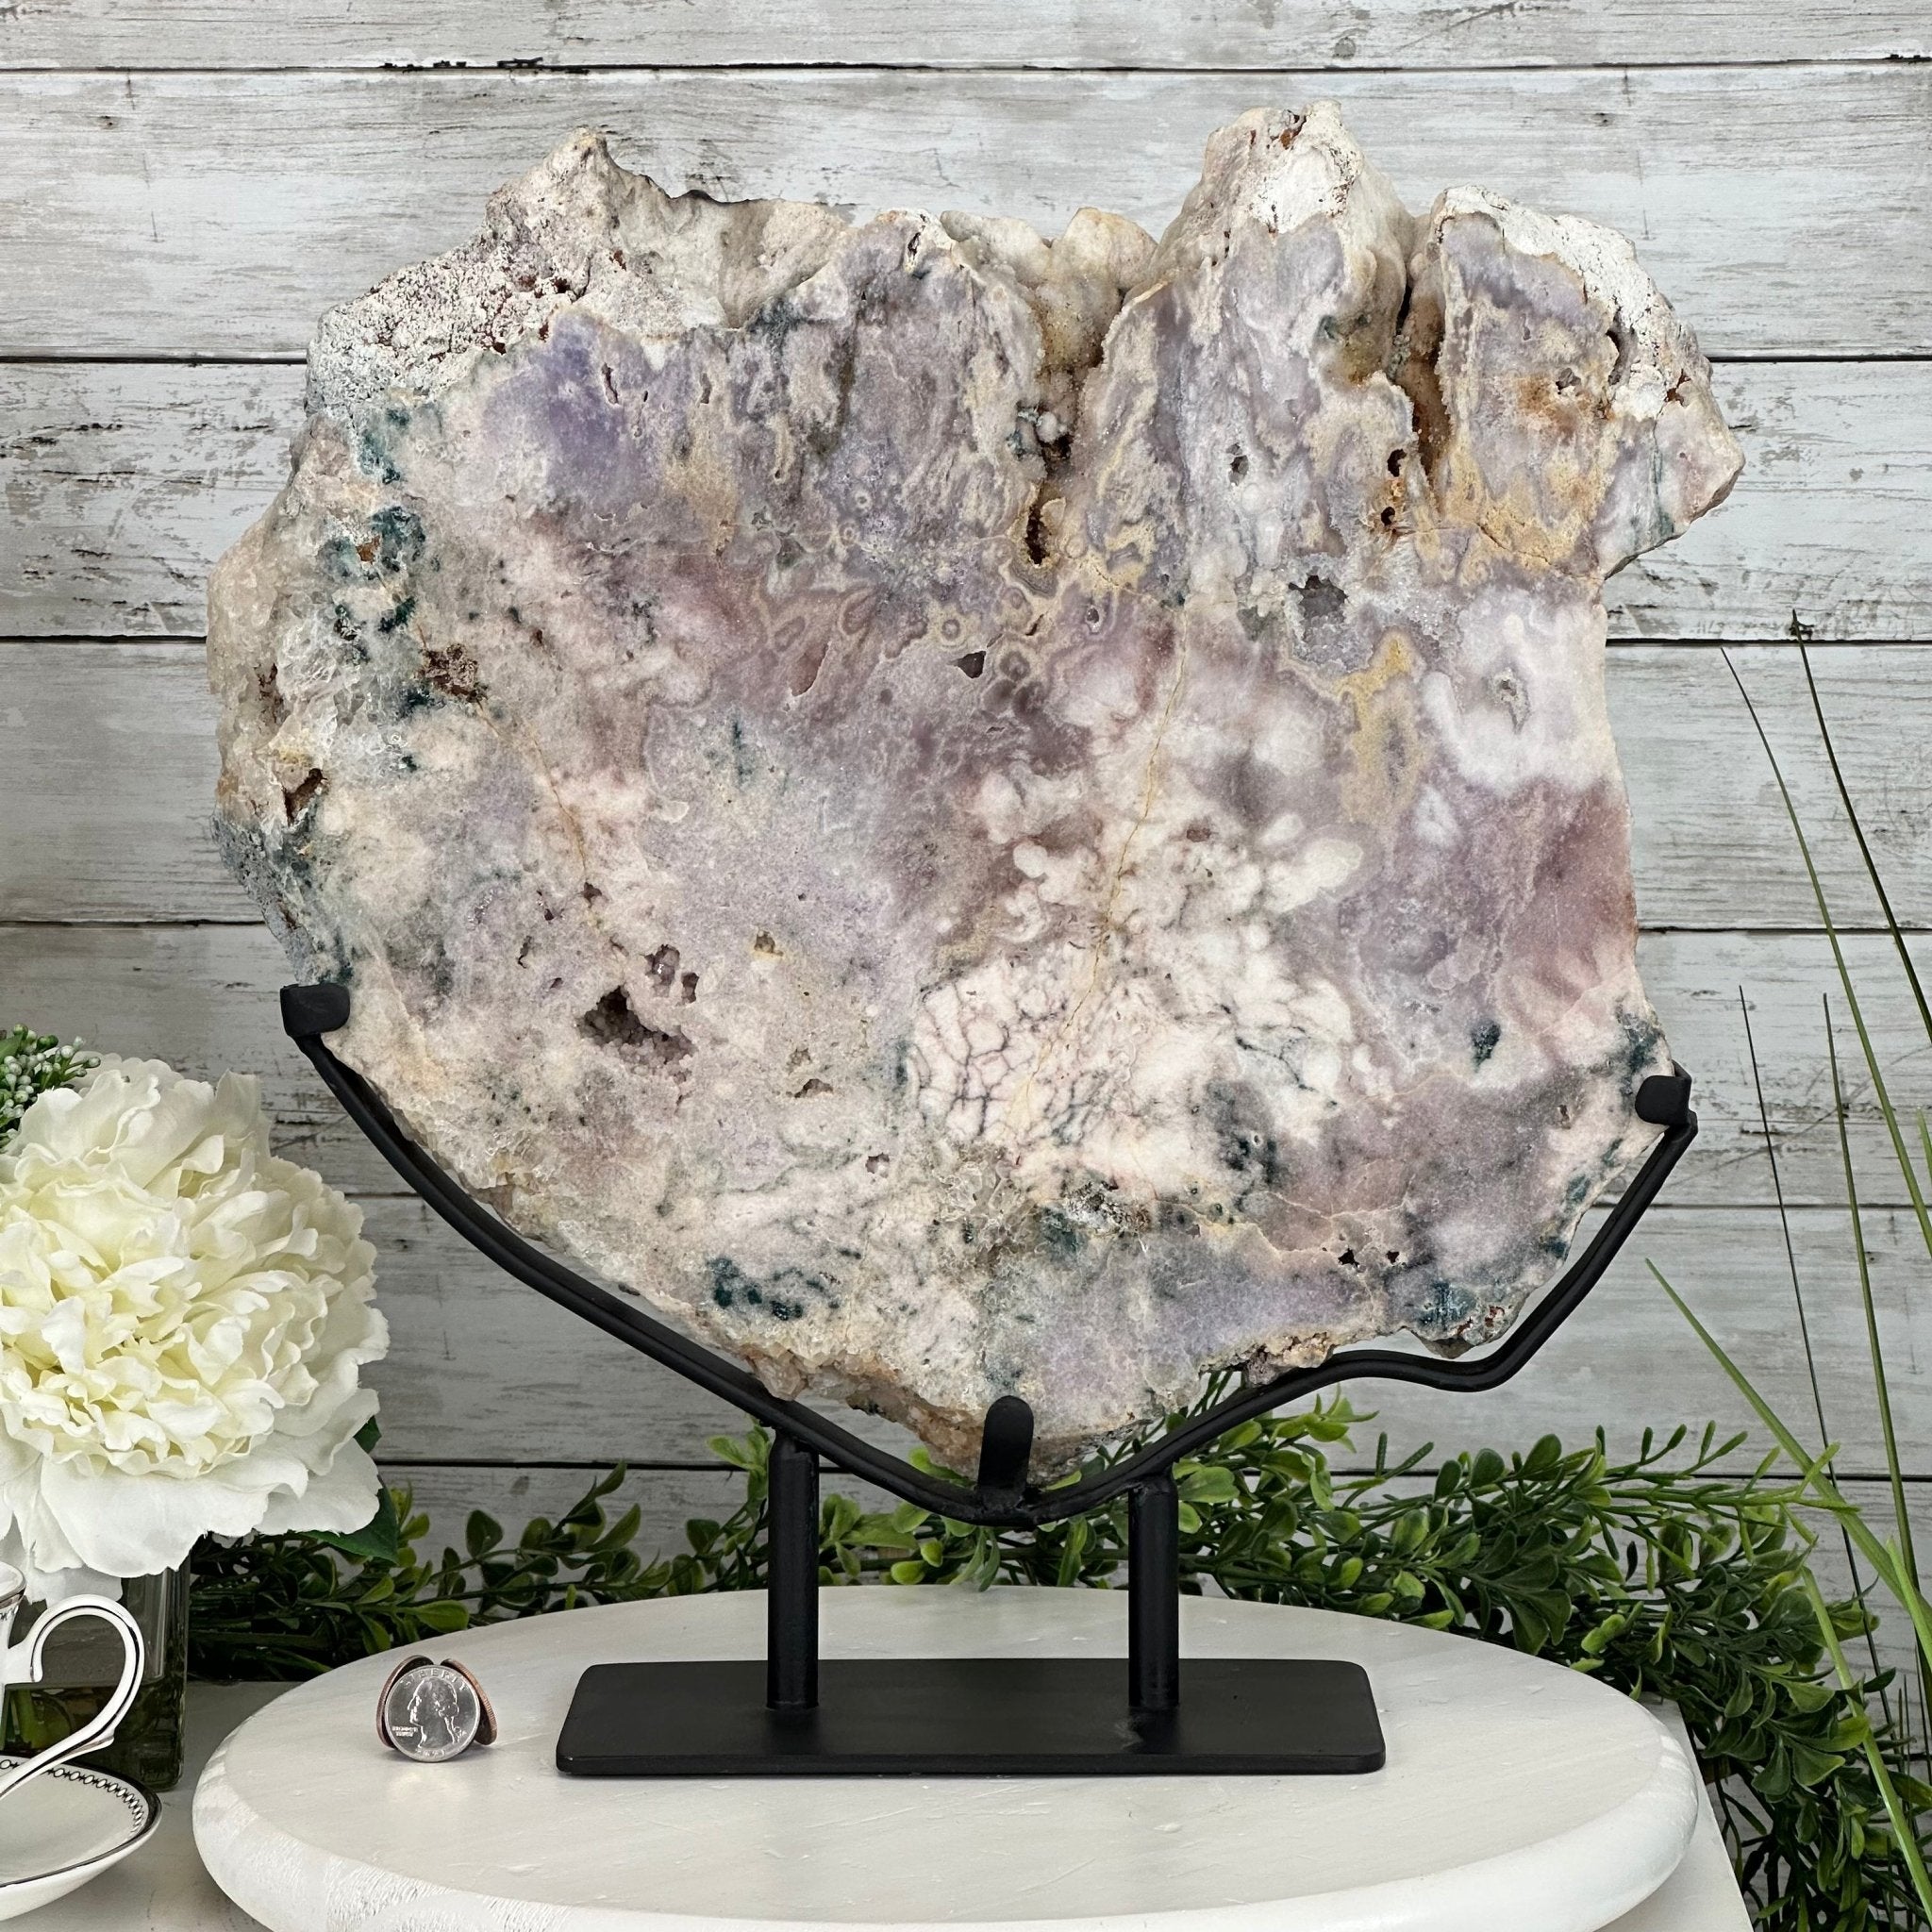 Polished Pink Amethyst Slice on a Stand, 16.8 lbs, 16.2" Tall #5743-0015 by Brazil Gems - Brazil GemsBrazil GemsPolished Pink Amethyst Slice on a Stand, 16.8 lbs, 16.2" Tall #5743-0015 by Brazil GemsSlices on Fixed Bases5743-0015